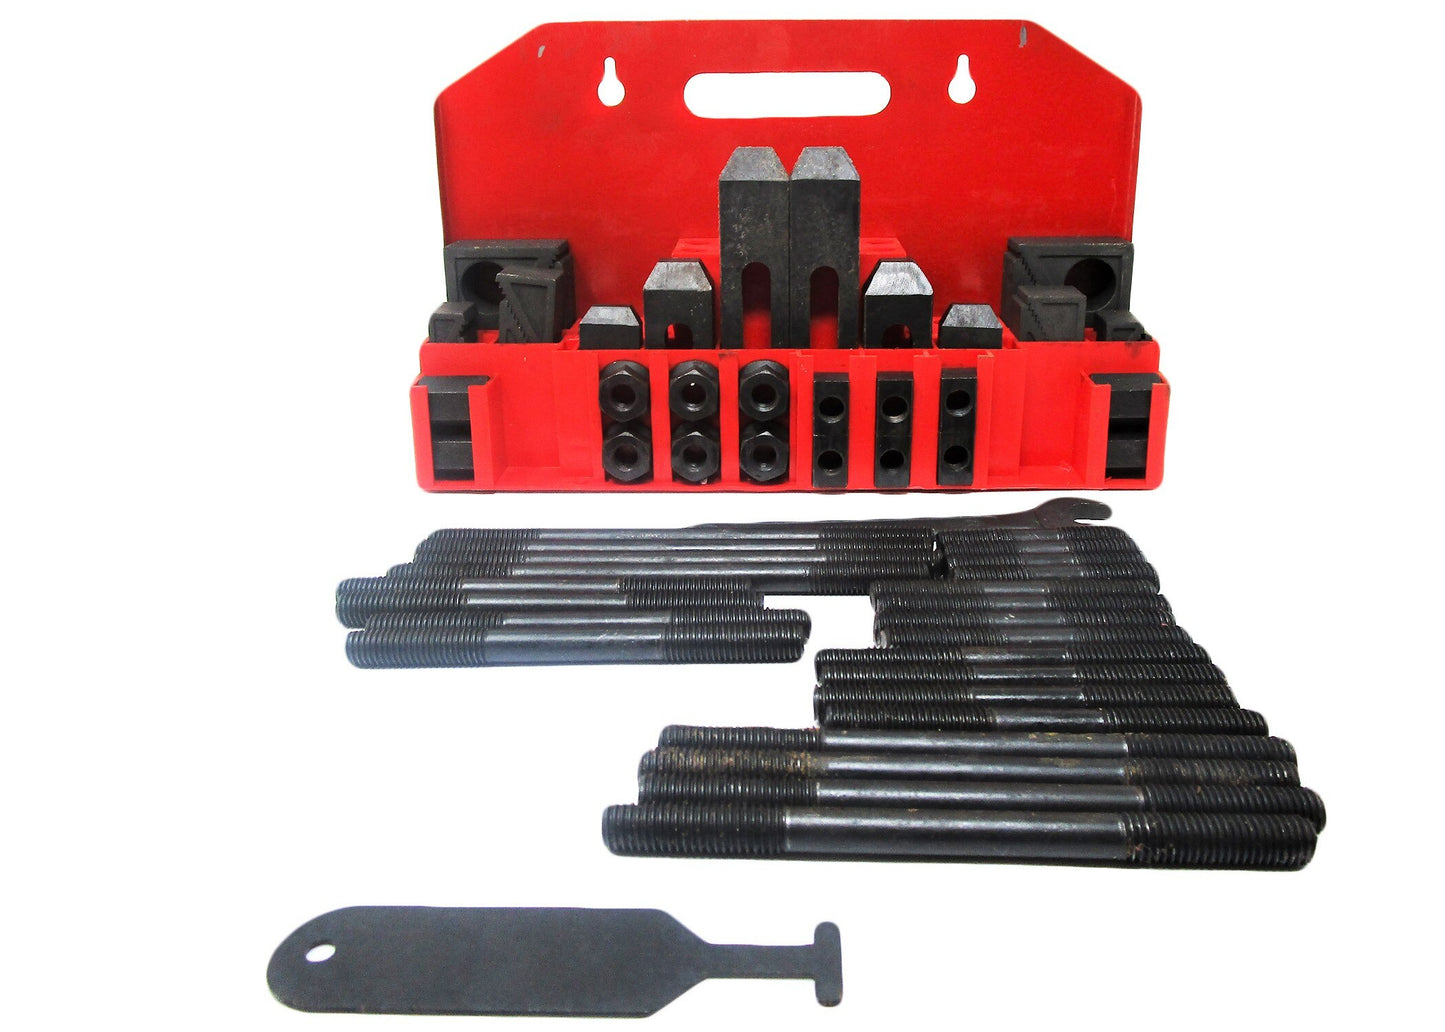 CK-12, 52-Piece Clamping Kit with Tray for 1/2" T-Slot